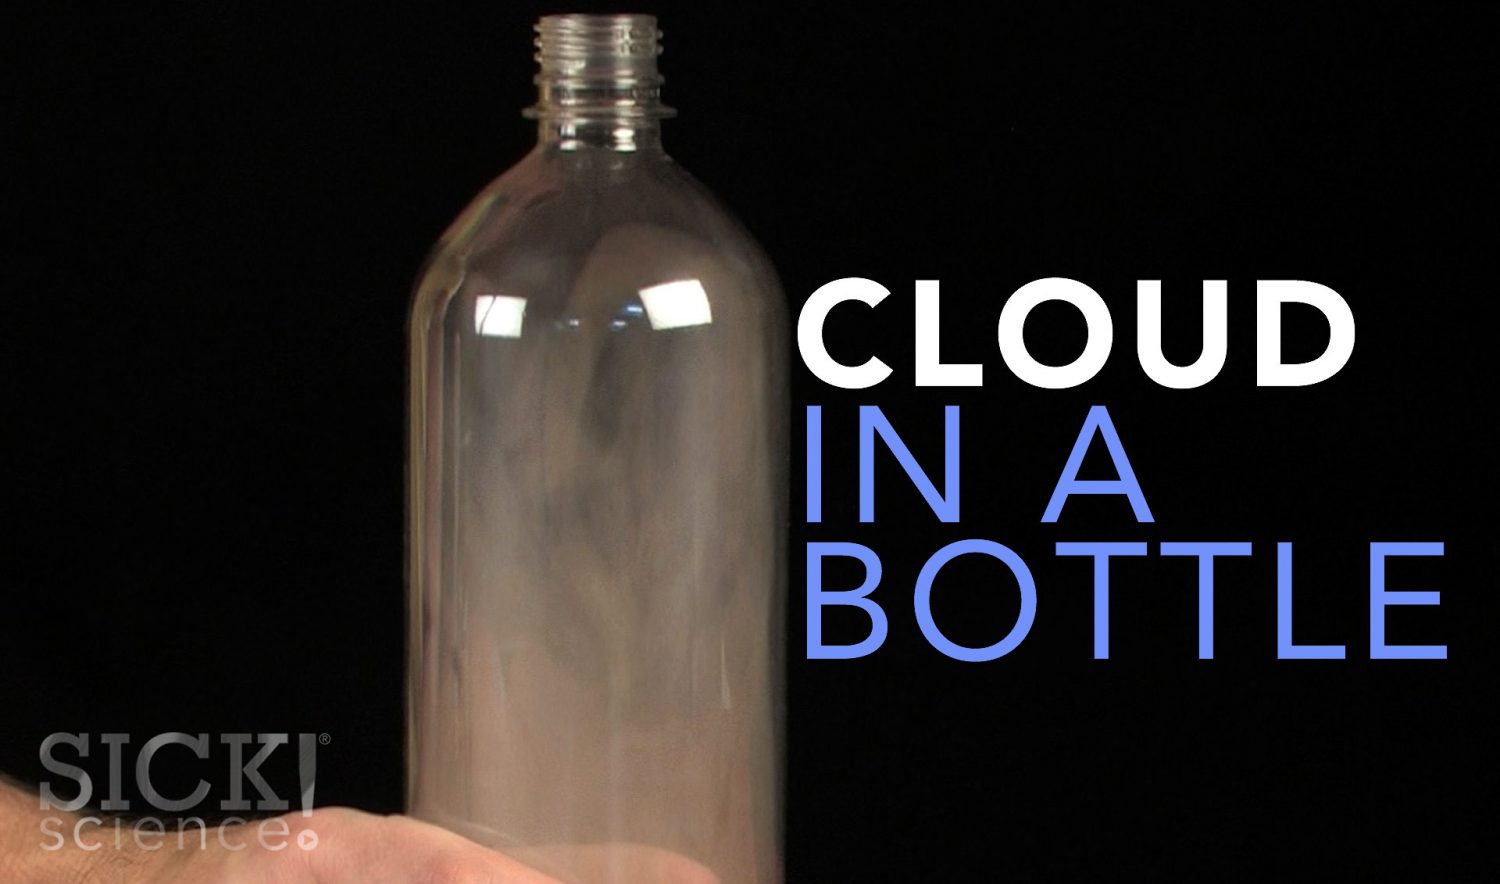 Cloud In A Bottle Sick Science 076 Science Experiment Videos Steve Spangler Science